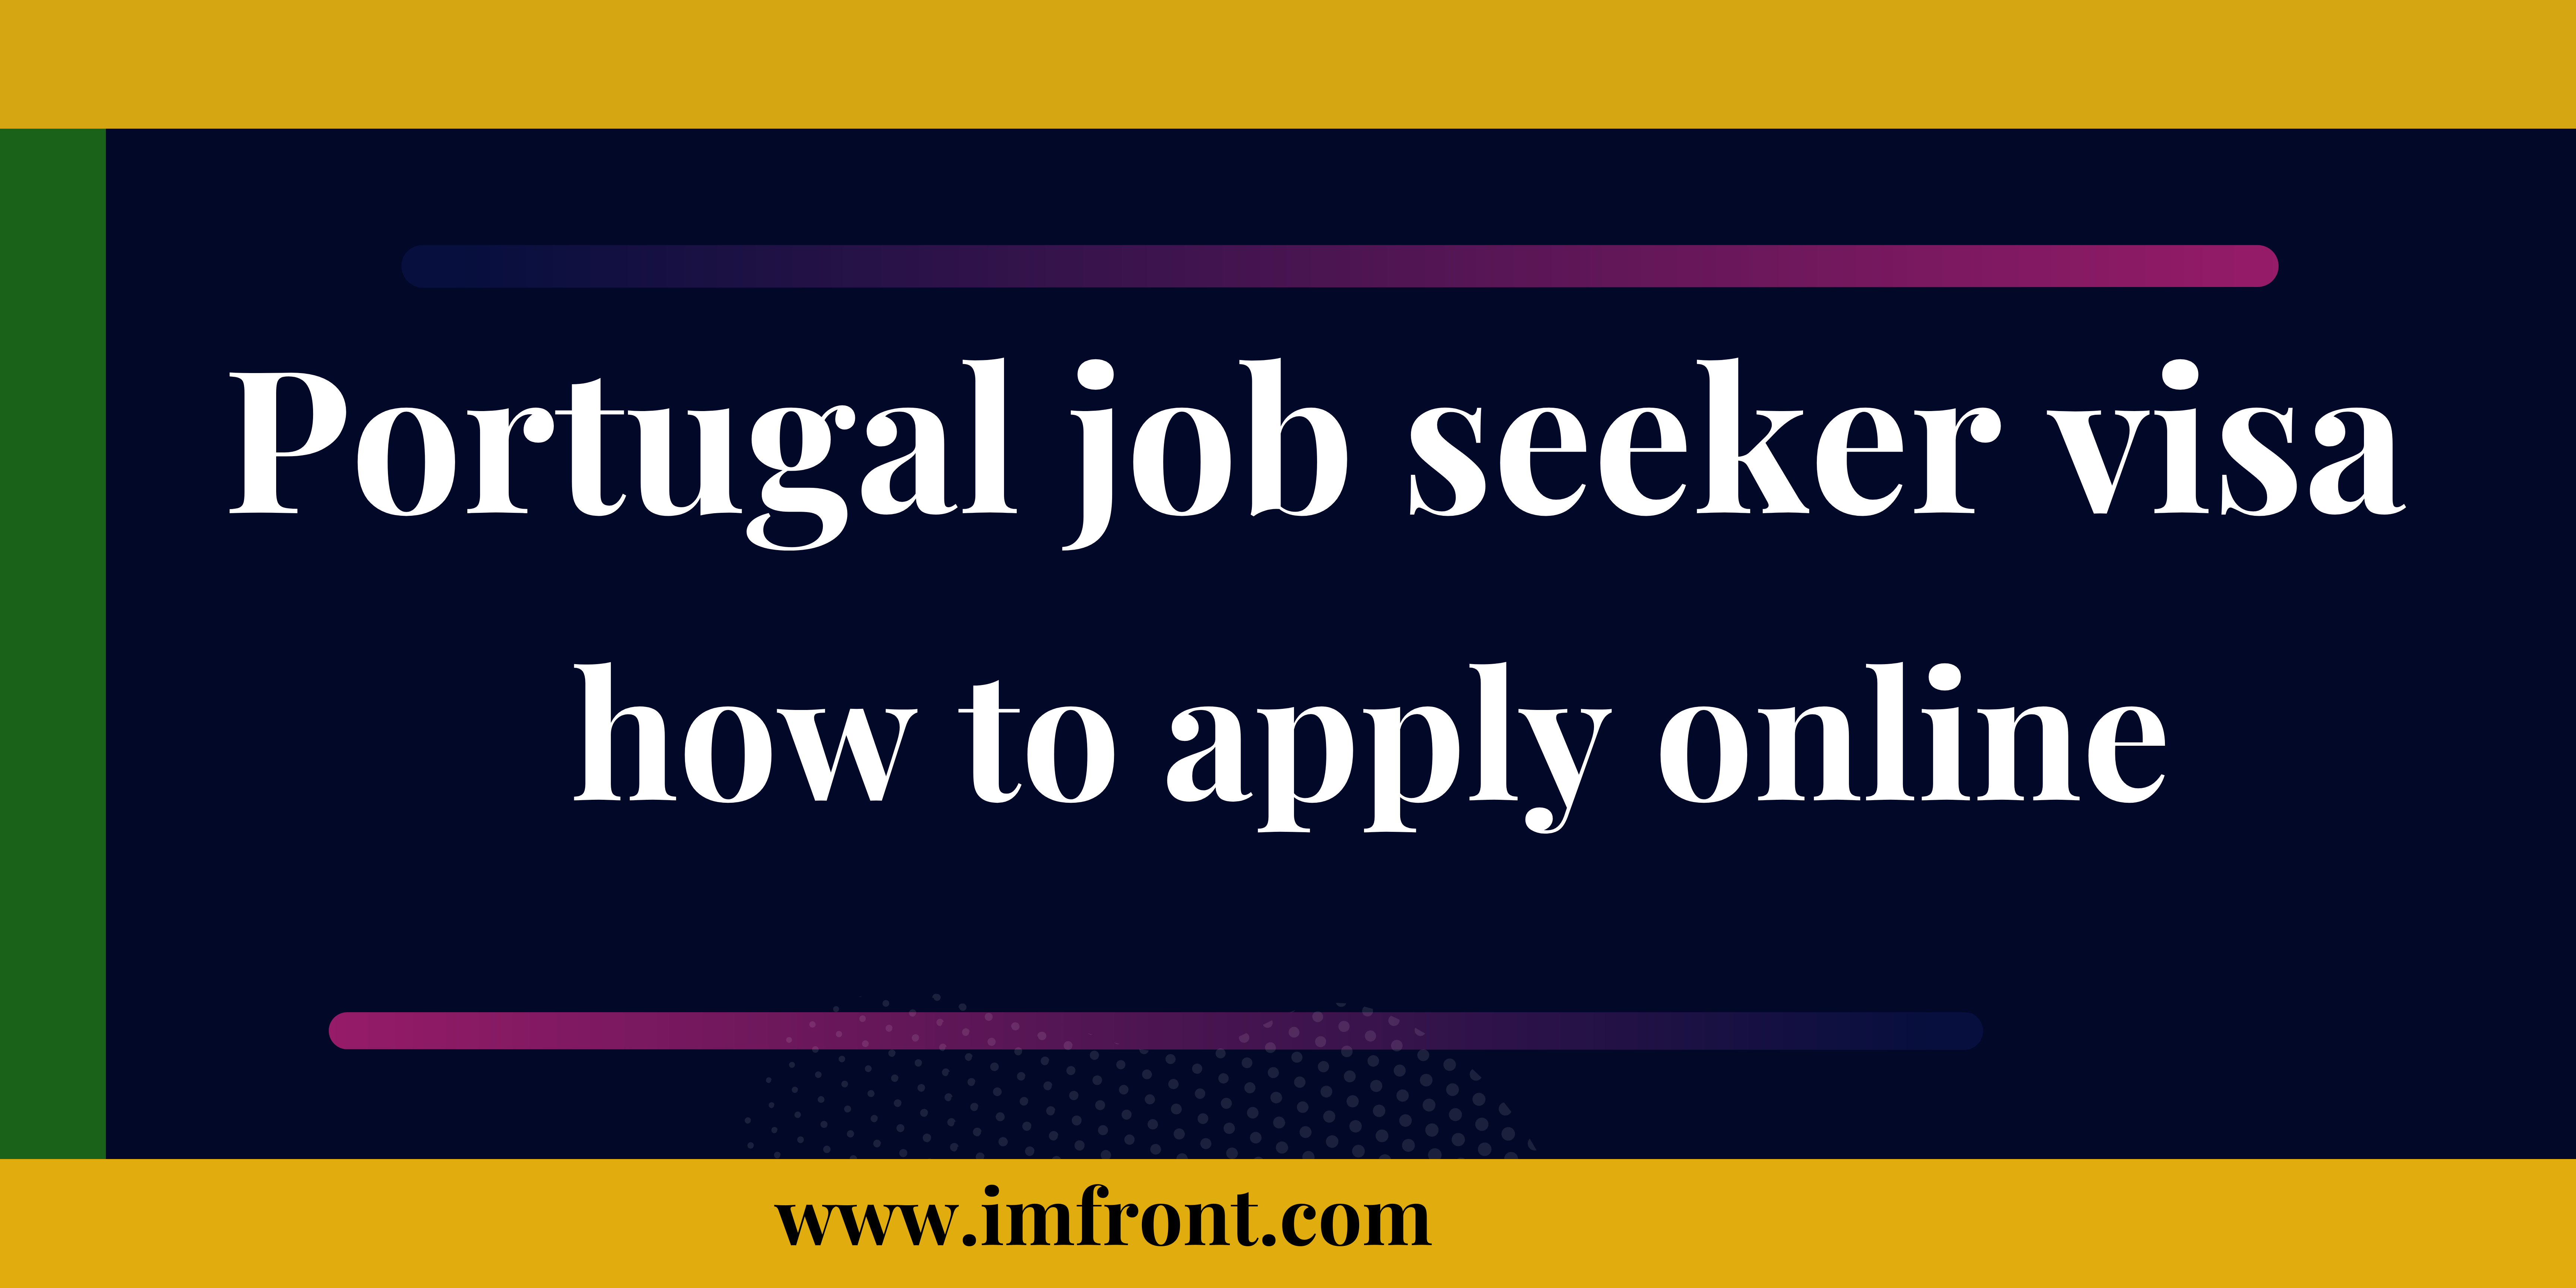 Portugal job seeker visa requirements 2023 how to apply online